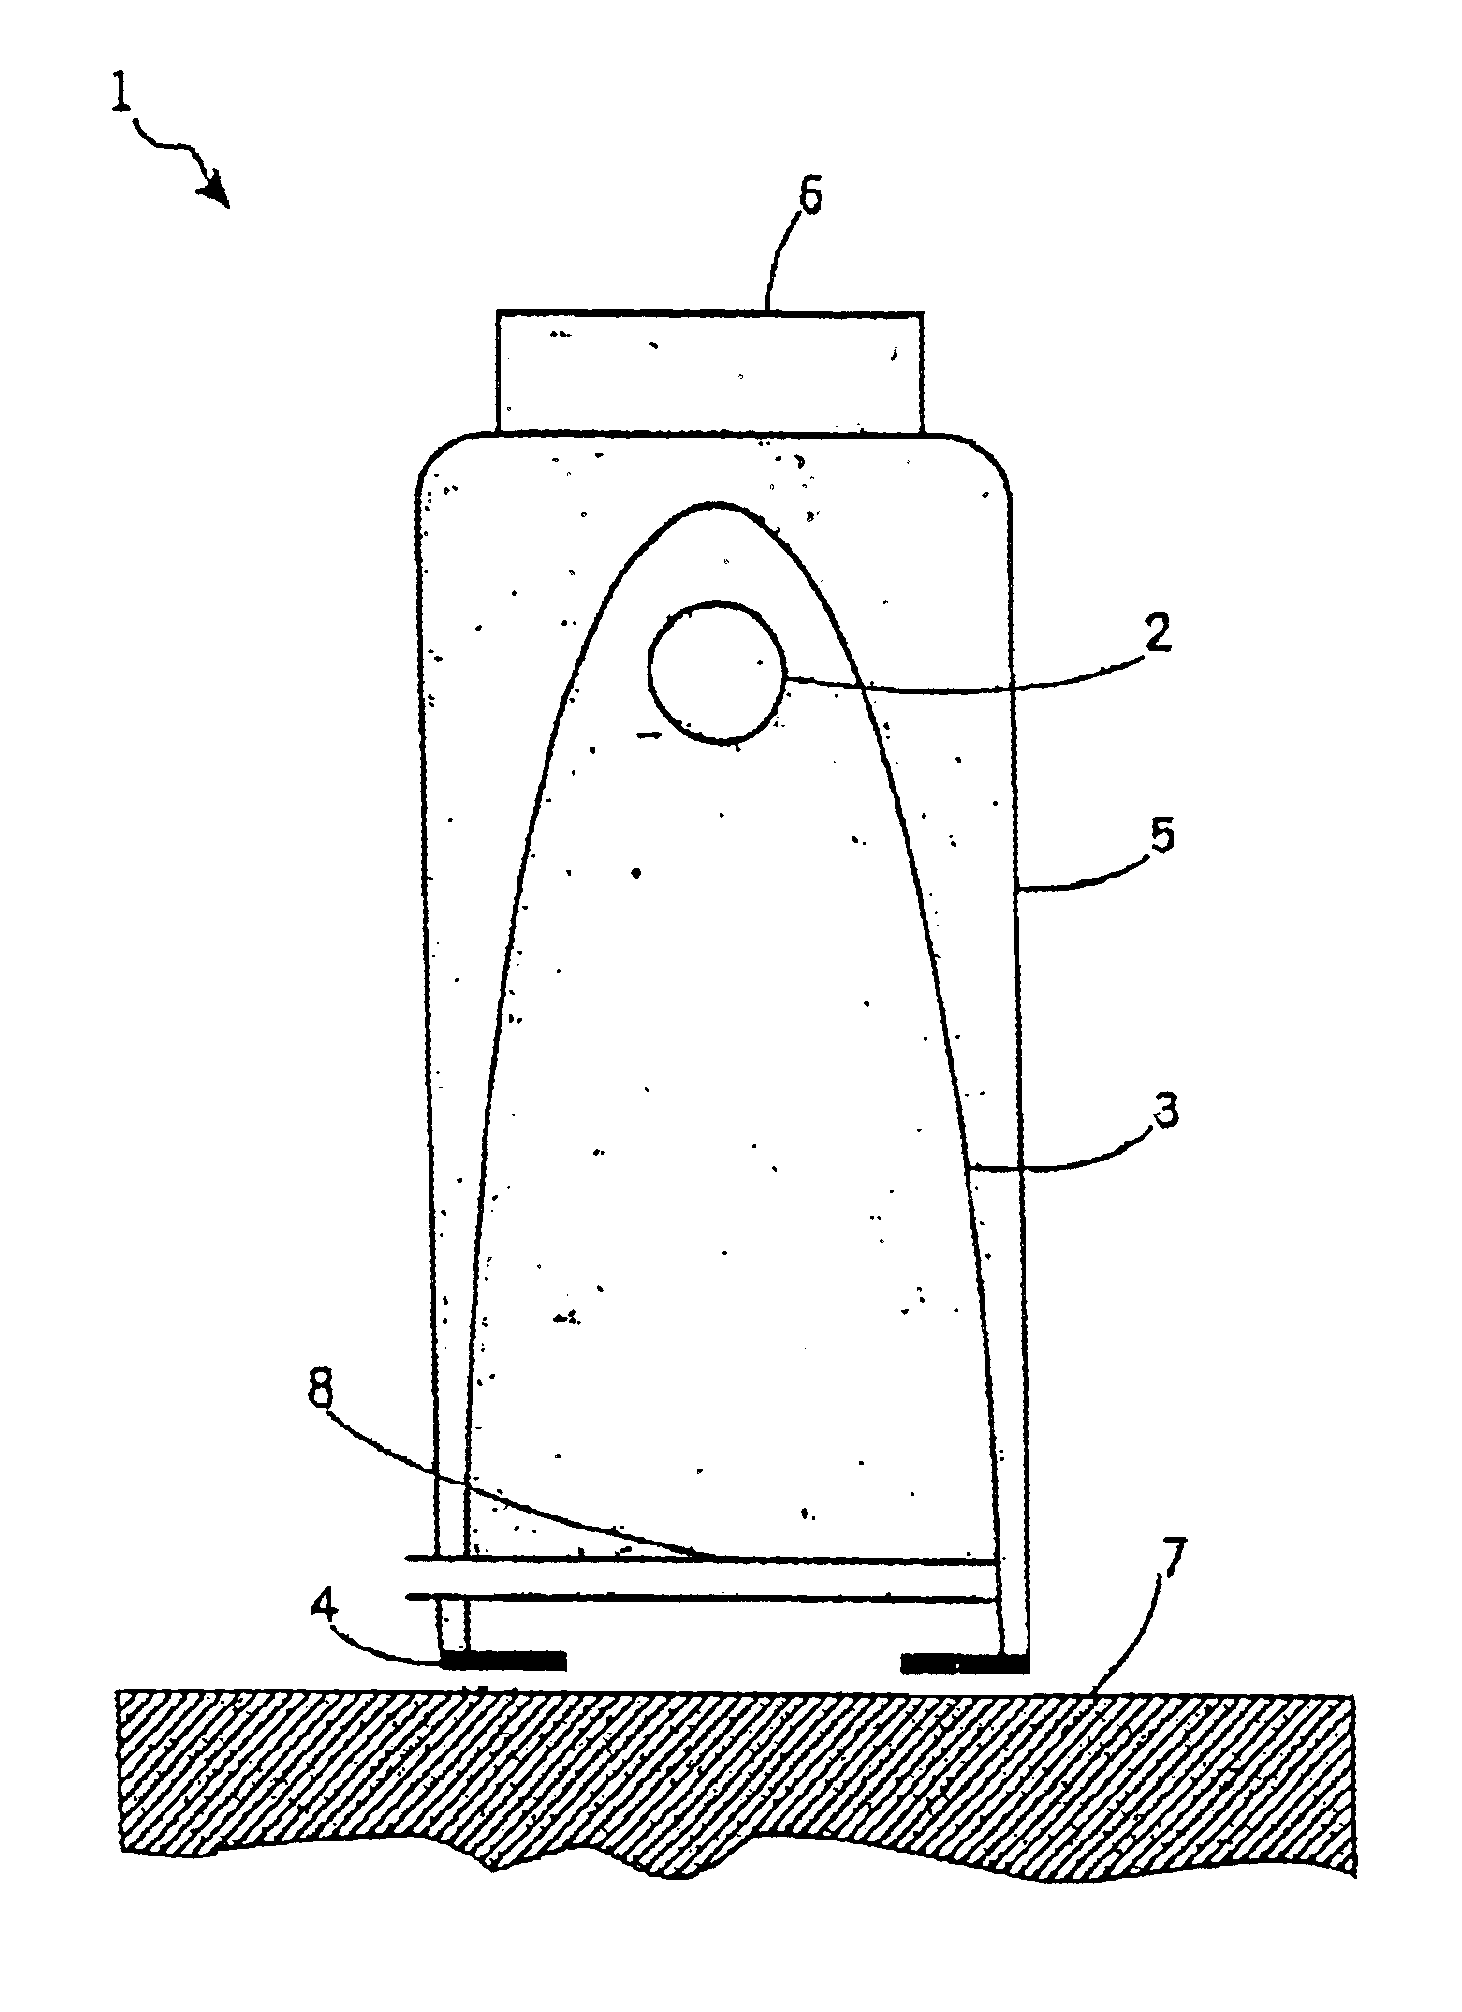 Irradiation device for therapeutic treatment of skin and other ailments